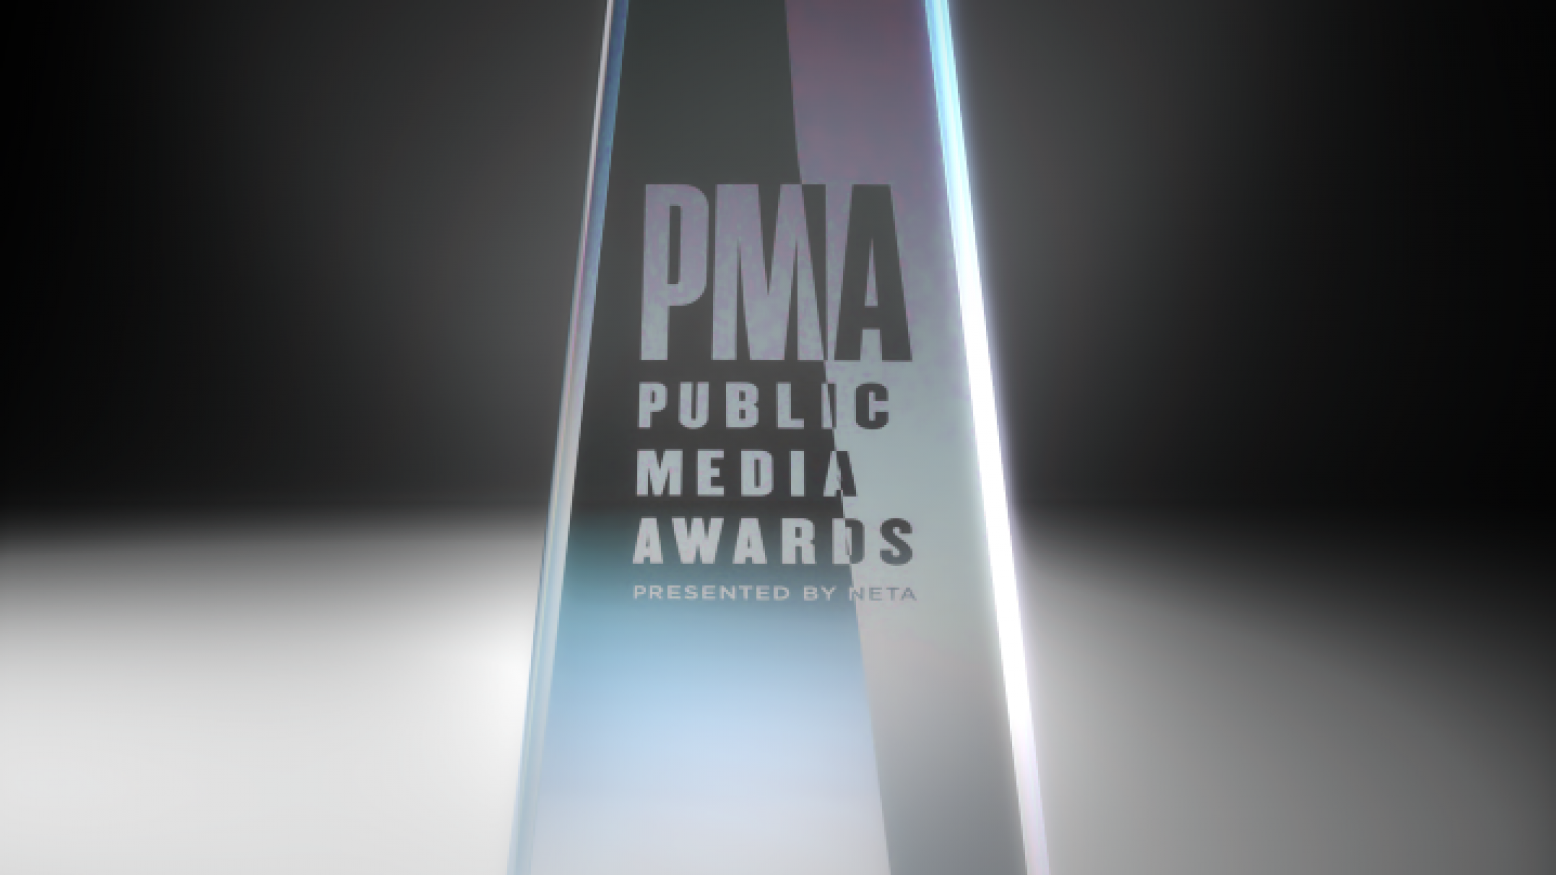 An image of a Public Media Awards trophy. The trophy is made of glass and is a pyramidal shape. Etched in the glass is the logo for the awards, reading "PMA Public Media Awards Presented by NETA."